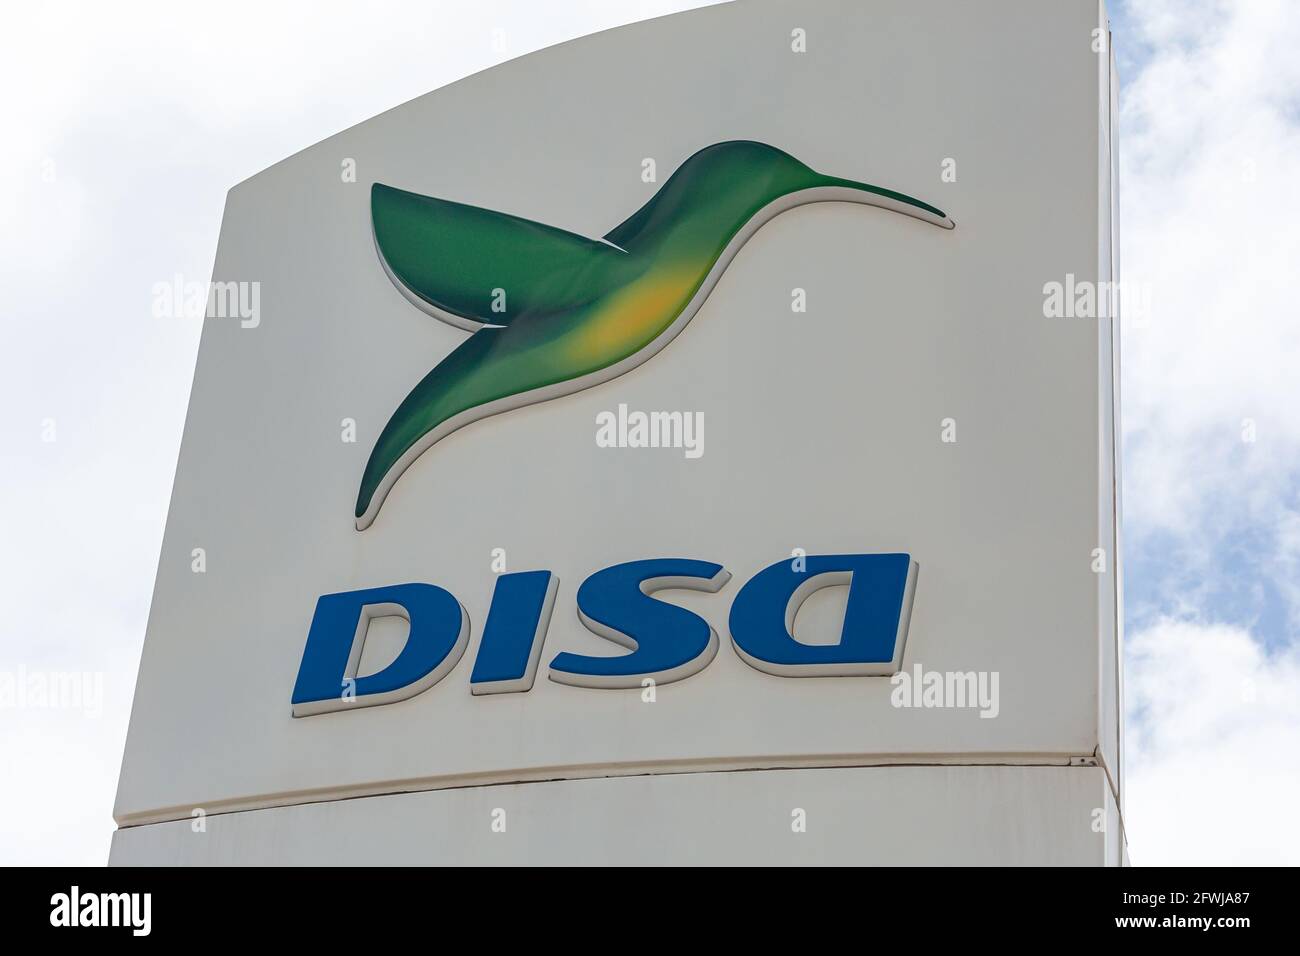 SPAIN, Tenerife - April 18, 2021: logo and name of the Spanish company of the gas station network DISA. Stock Photo Stock Photo